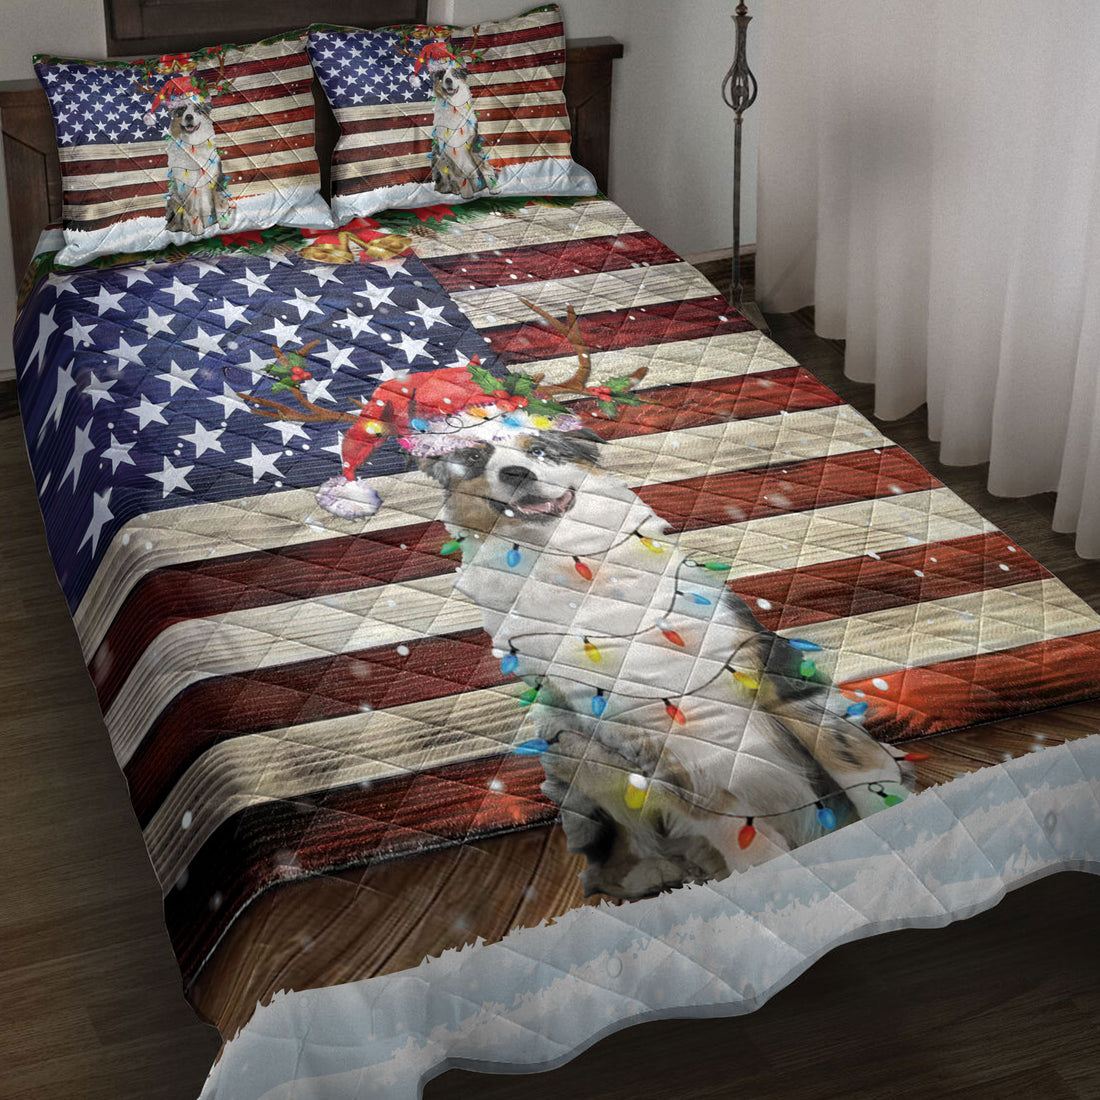 Ohaprints-Quilt-Bed-Set-Pillowcase-Australian-Shepherd-Wearing-A-Red-Reindeer-Hat-With-String-Light-Blanket-Bedspread-Bedding-4118-Throw (55'' x 60'')